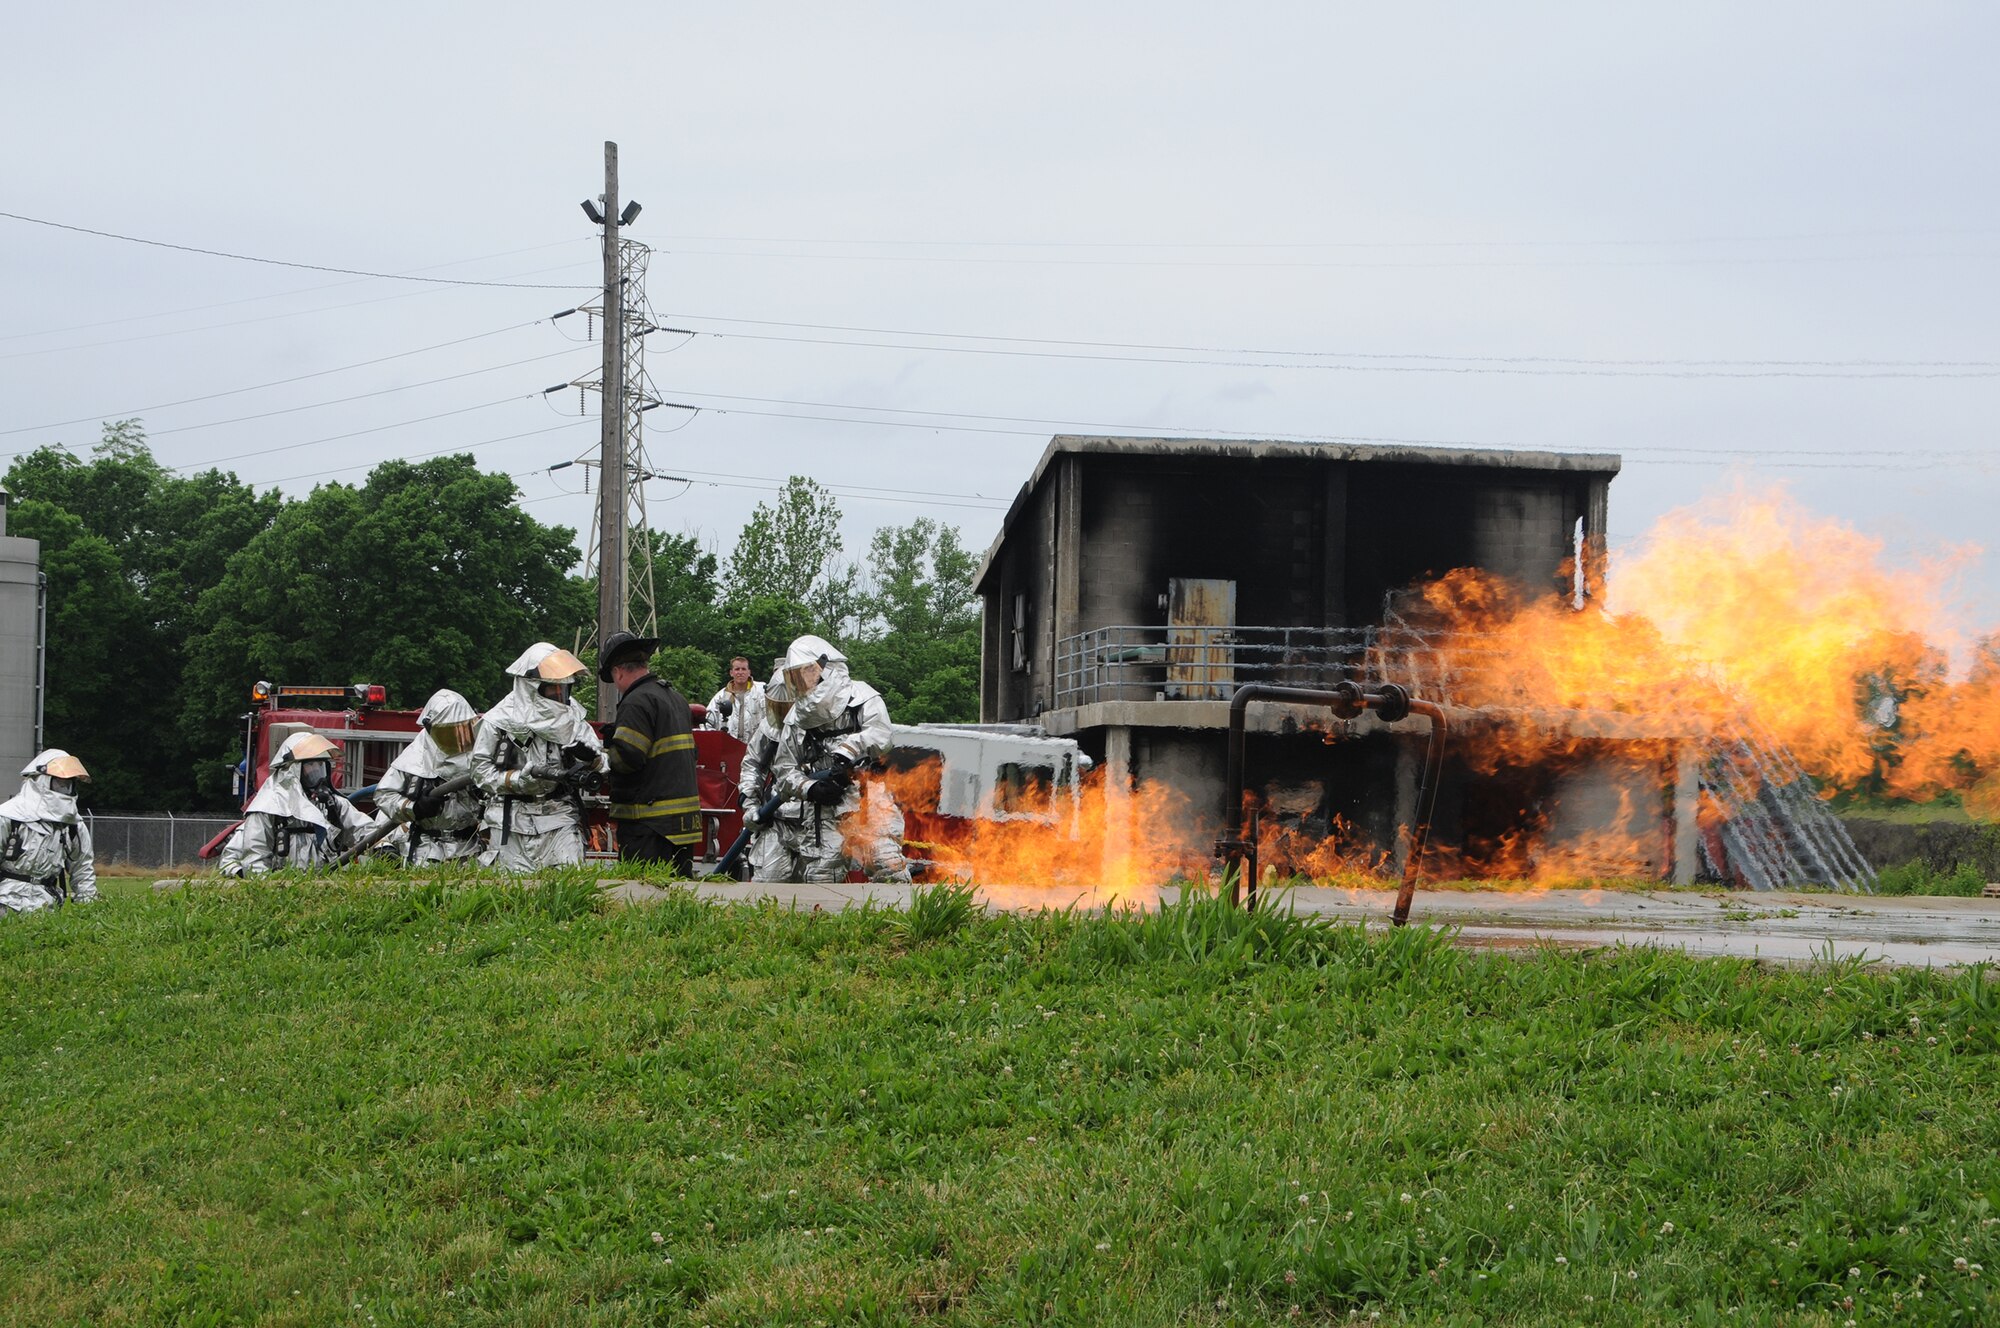 WRIGHT-PATTERSON AIR FORCE BASE, Ohio - Capt. Larry Ables, Dayton Fire Department, instructs firefighters from the 445th Civil Engineer Squadron Fire and Emergency Services Flight on technique as they douse a natural gas leak fire during a training session June 1 at the Dayton Fire Department Training Center. (U.S. Air Force photo/Tech. Sgt. Anthony Springer)